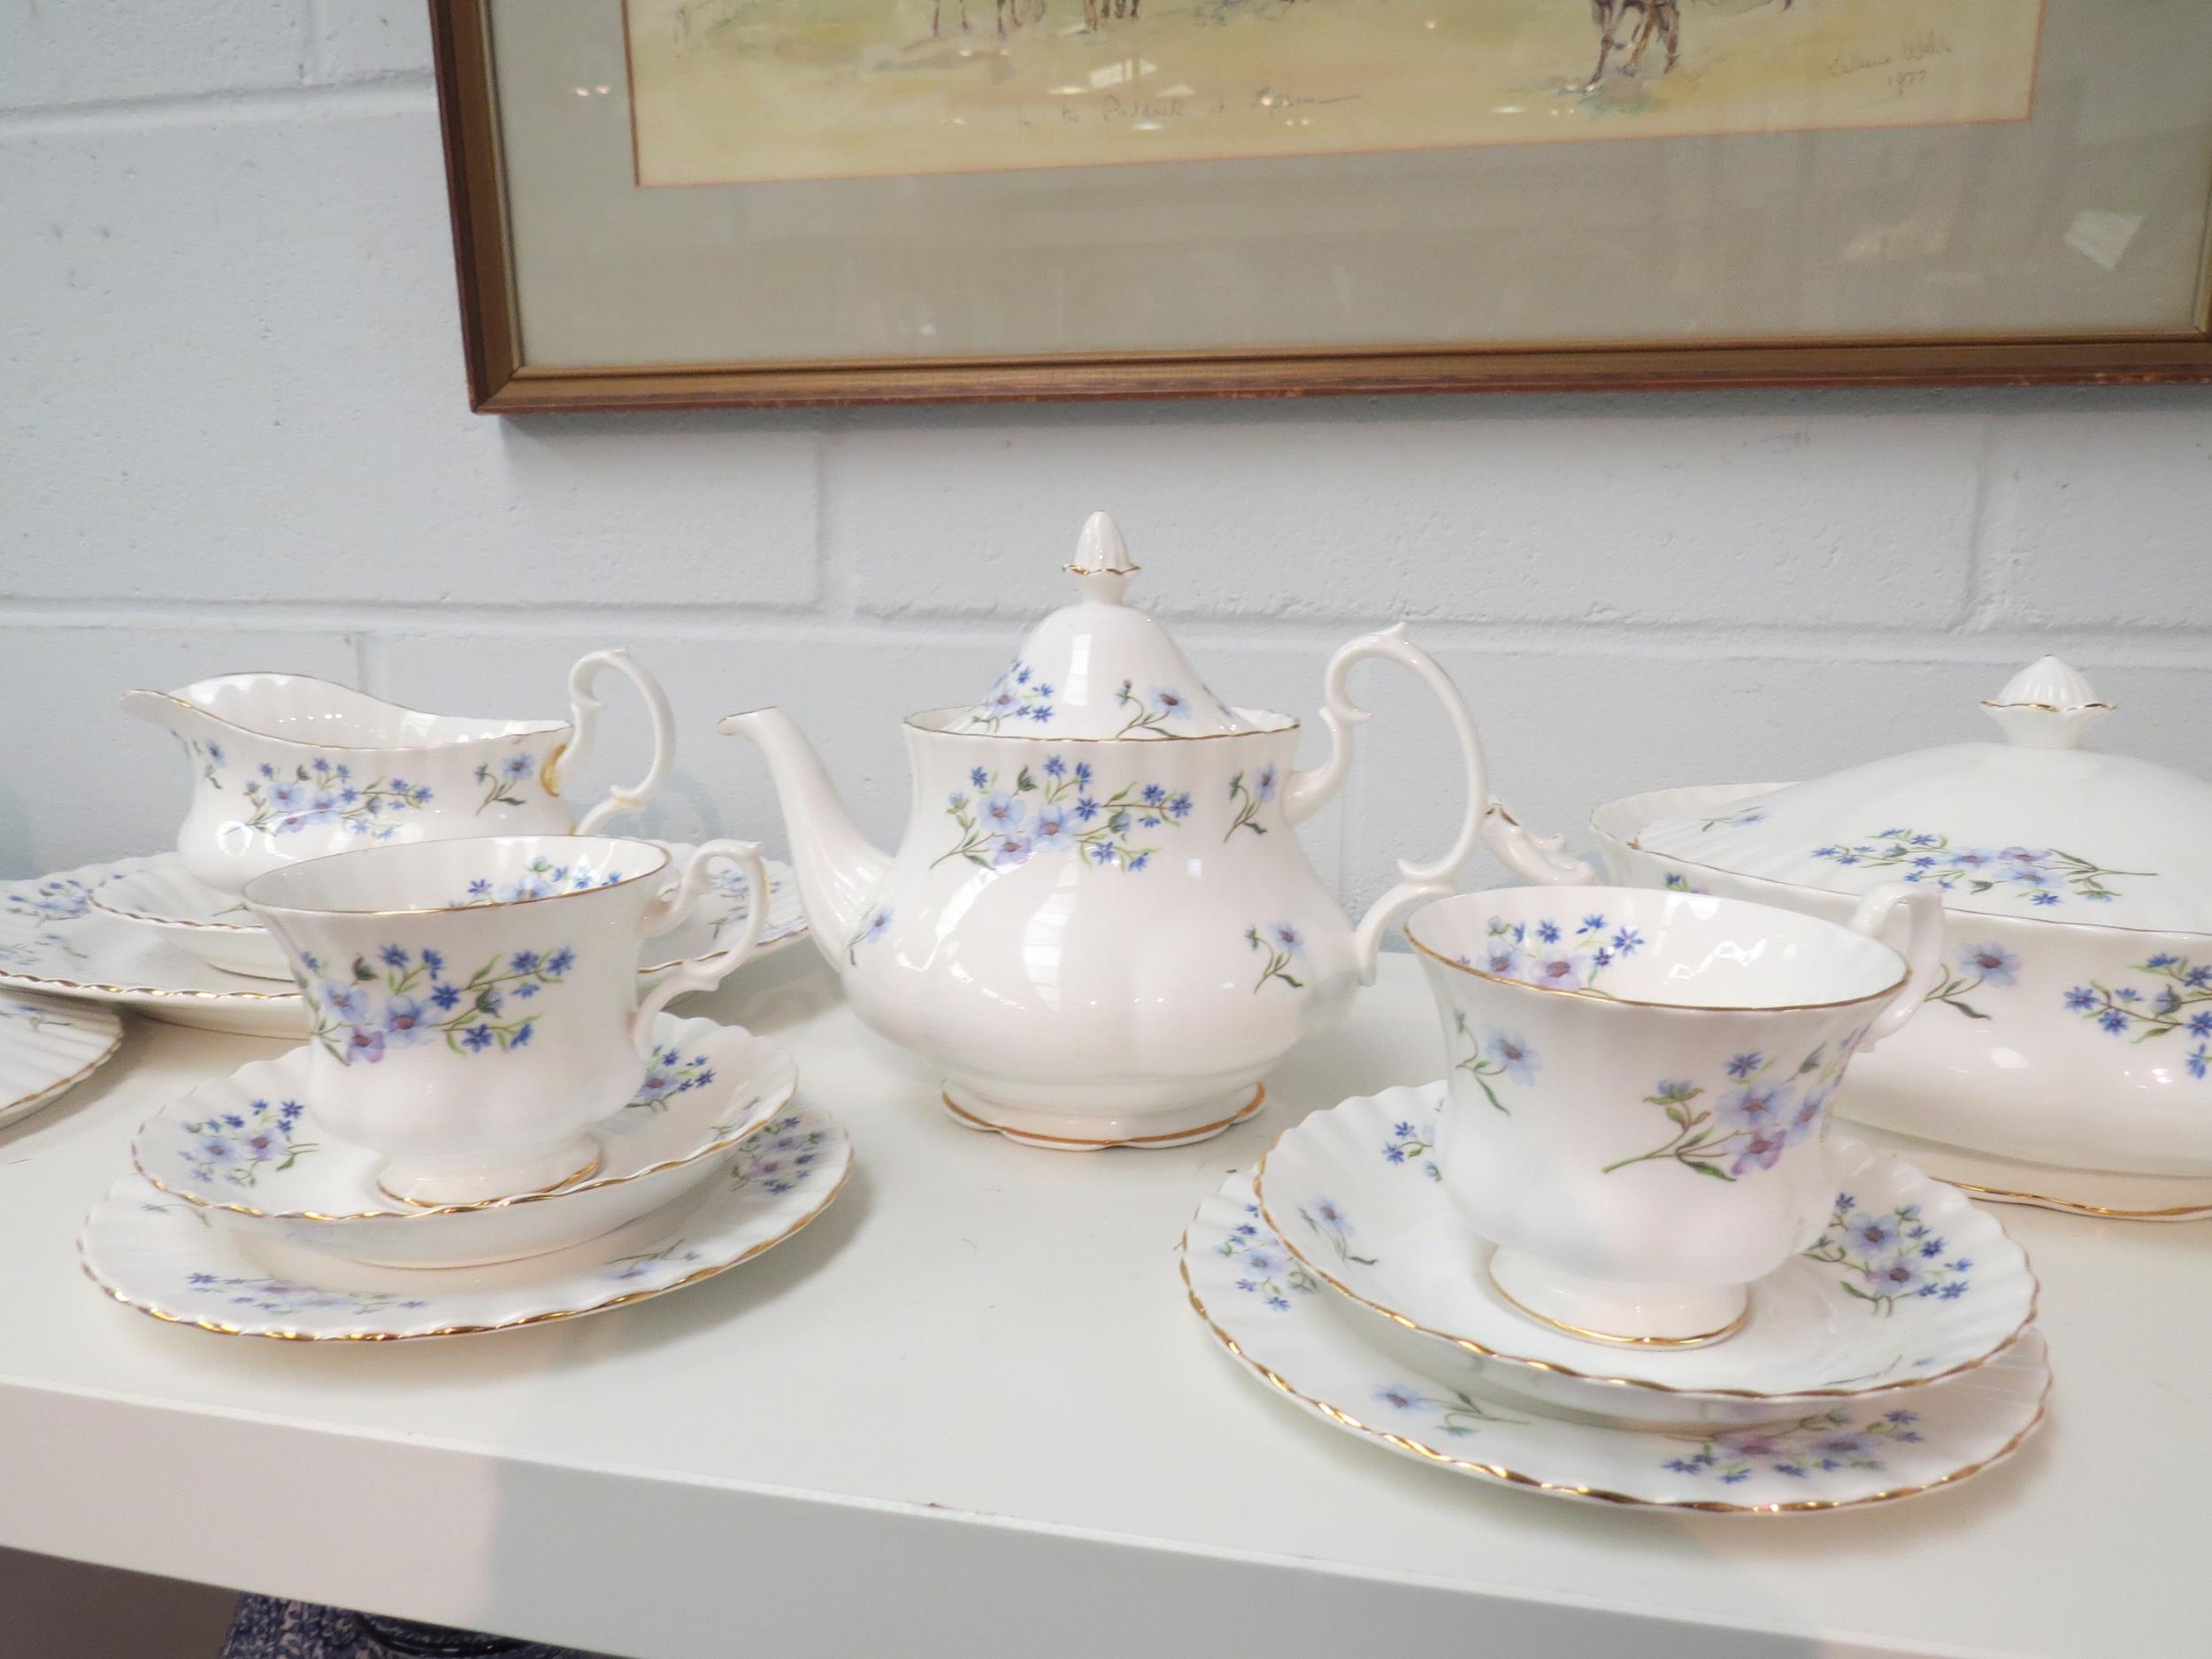 A quantity of Richmond 'Blue Rock' tea and dinner wares, gravy boat handle damaged - Image 3 of 4